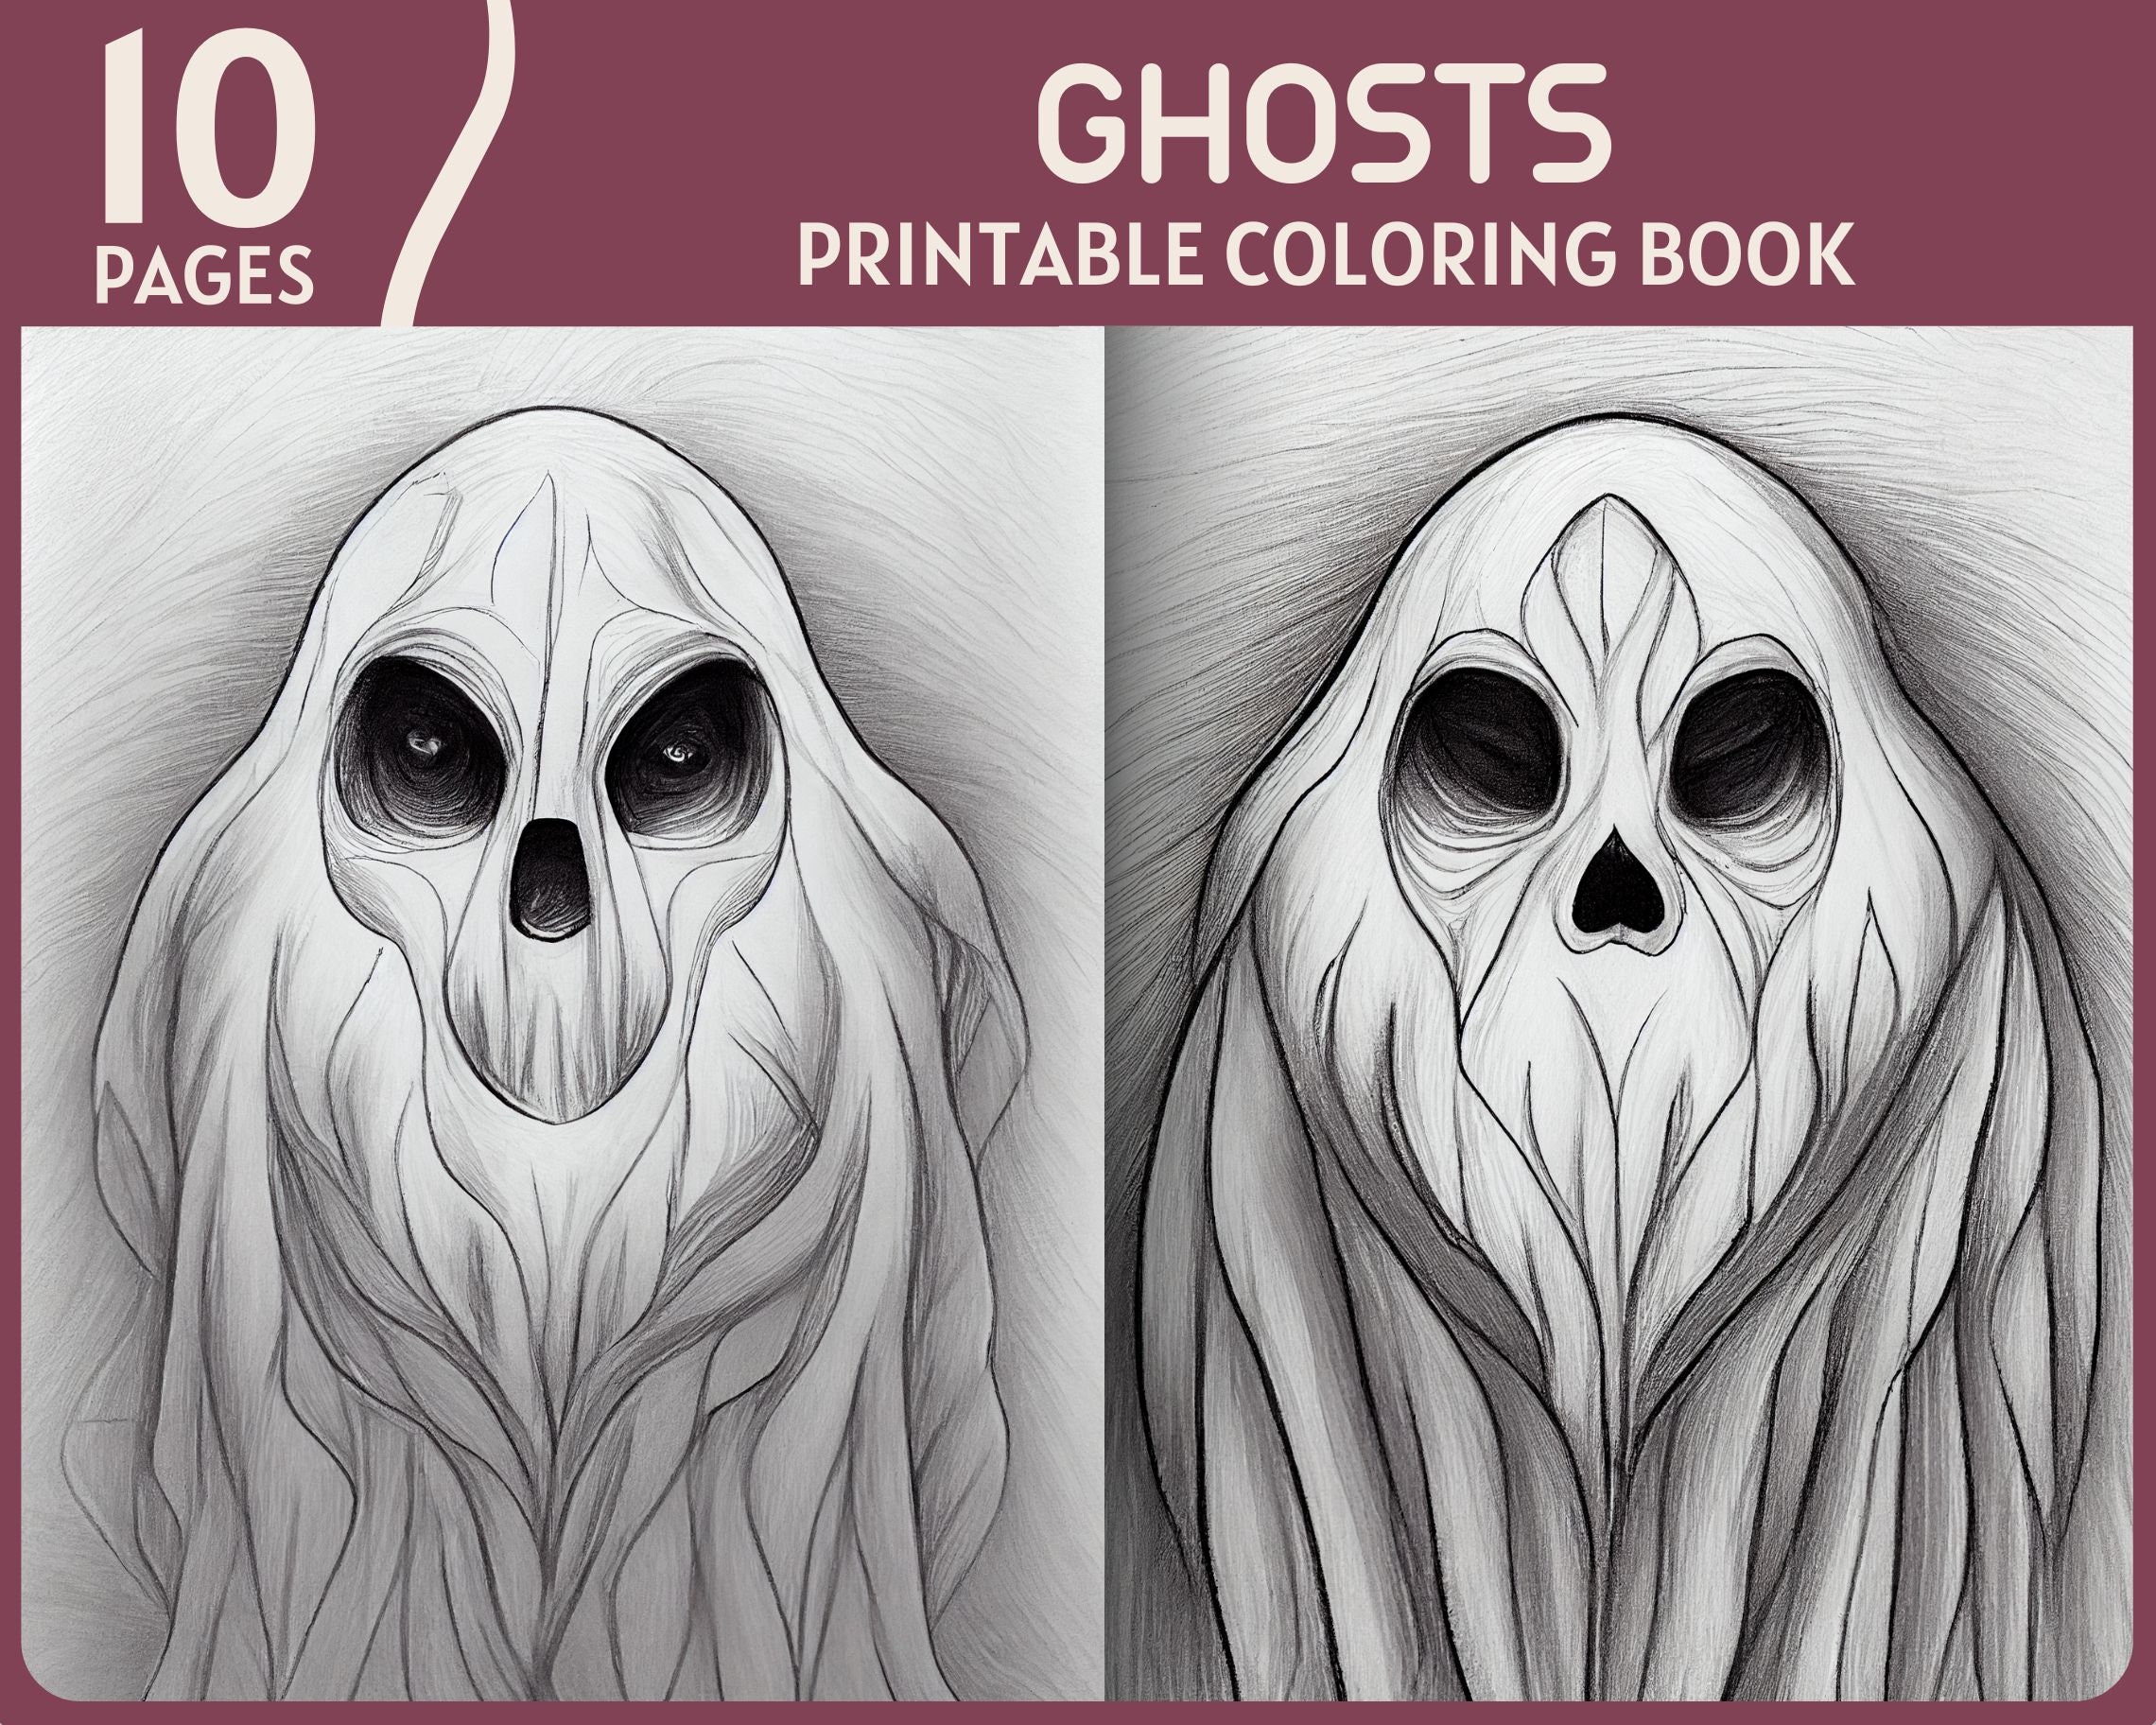 Ghosts coloring pages ghost illustrations printable coloring book ghosts digital coloring page